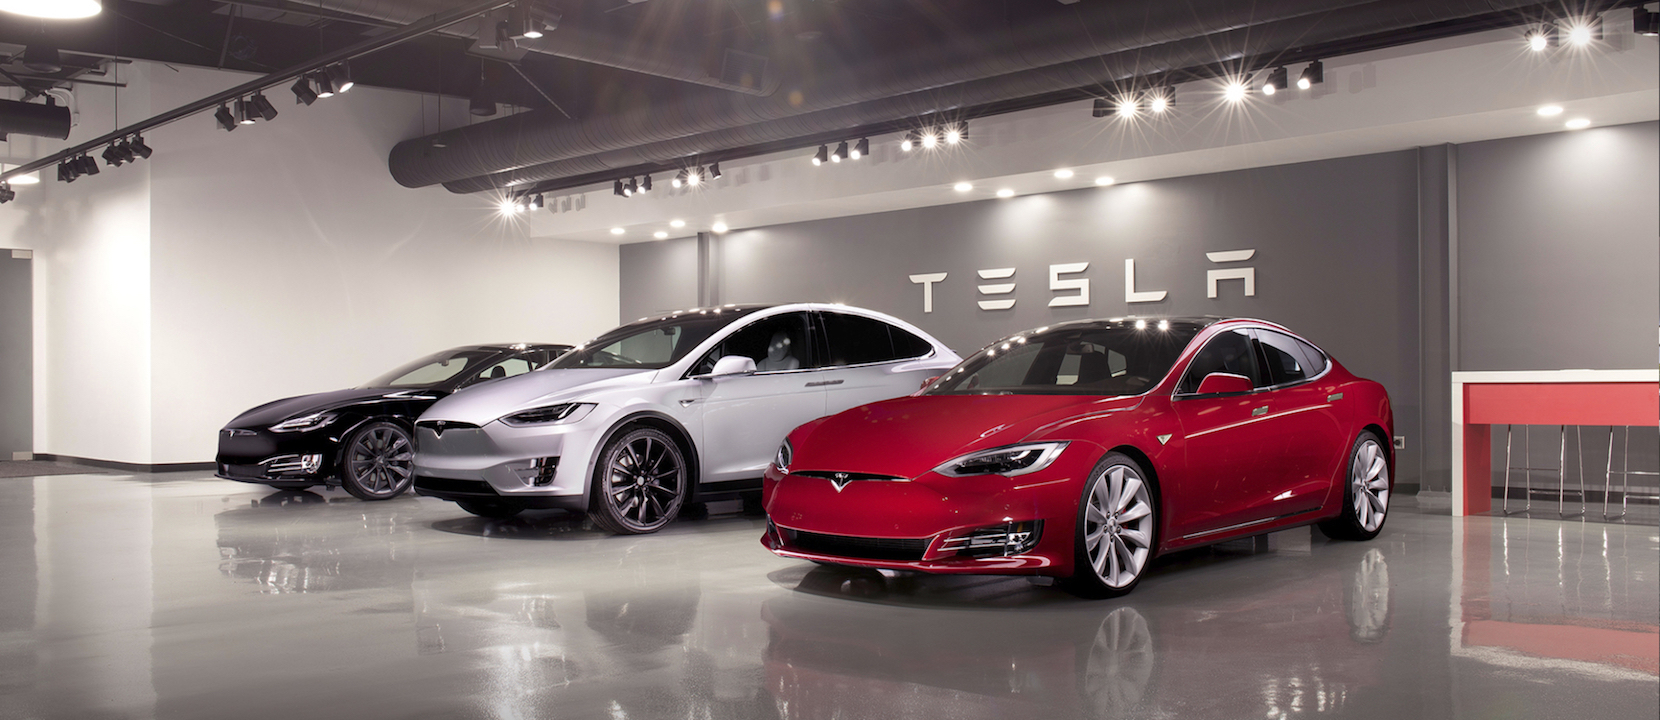 tesla-model-s-x-collection-store